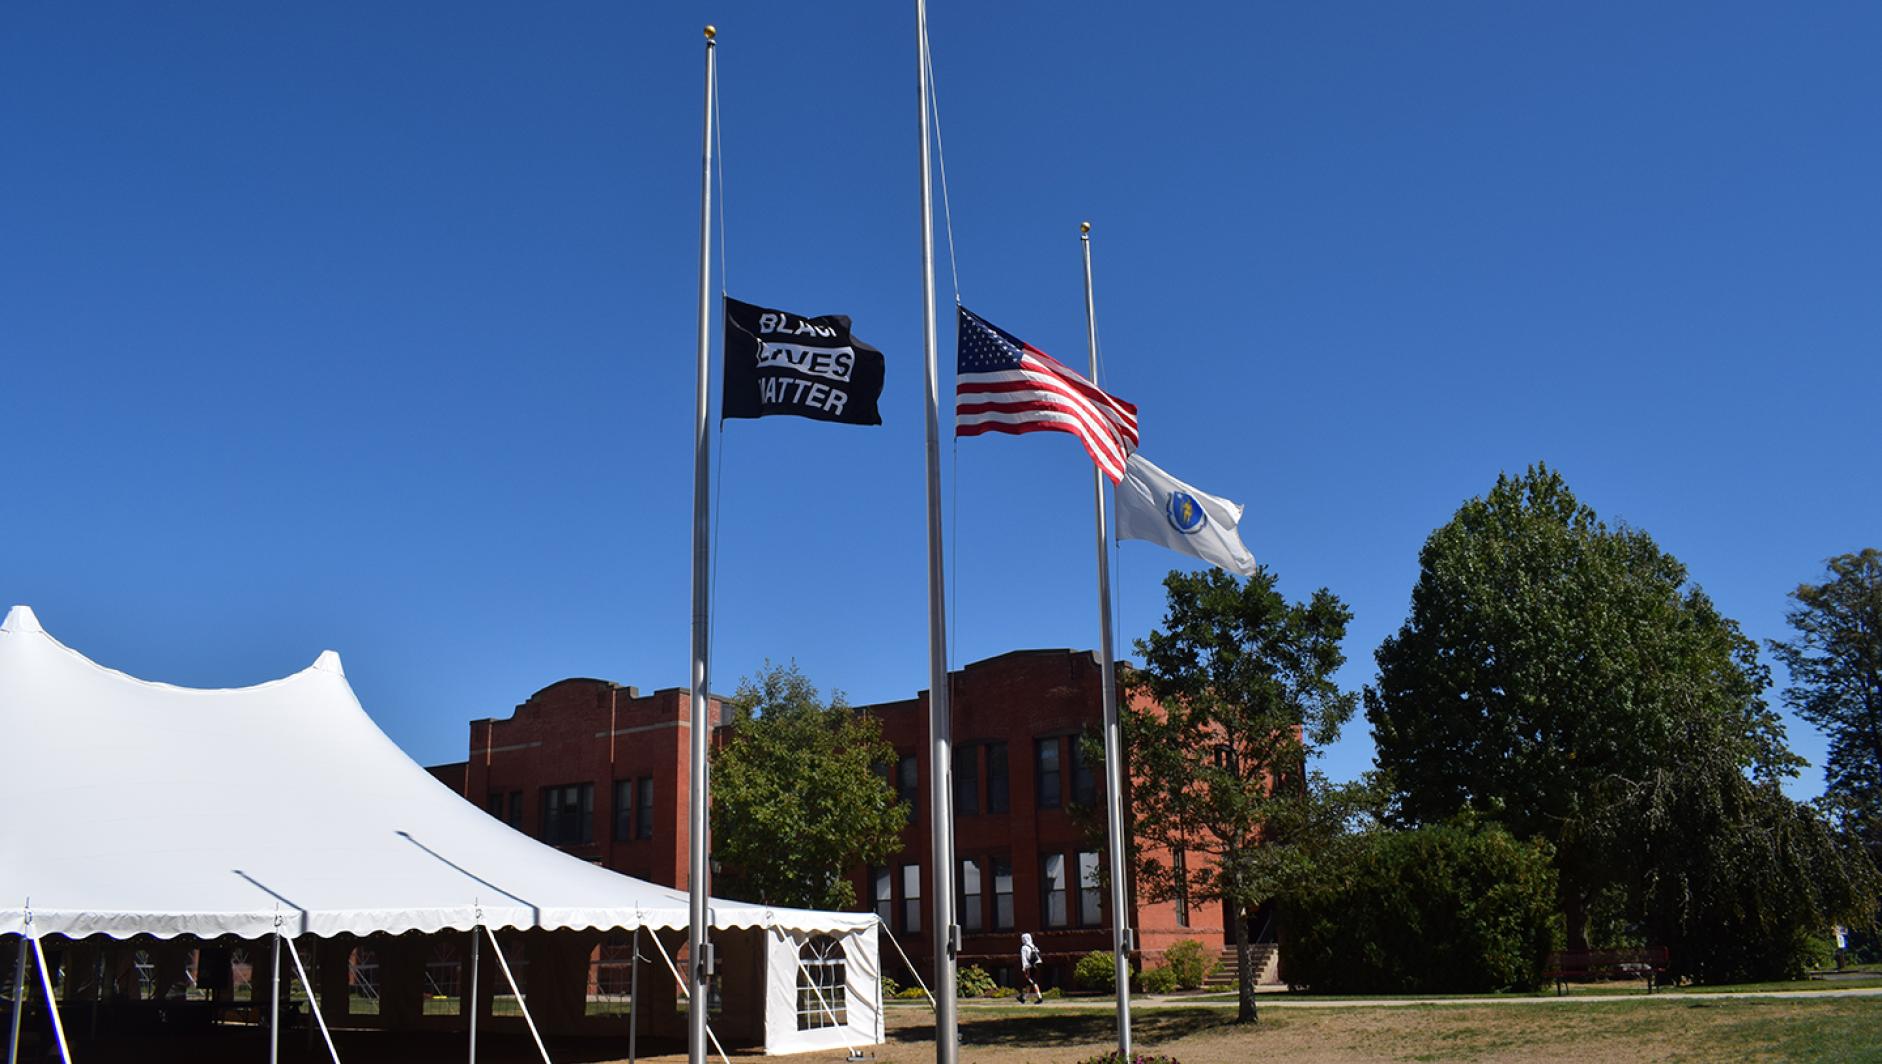 Black Lives Matter flag raised on the Springfield College campus